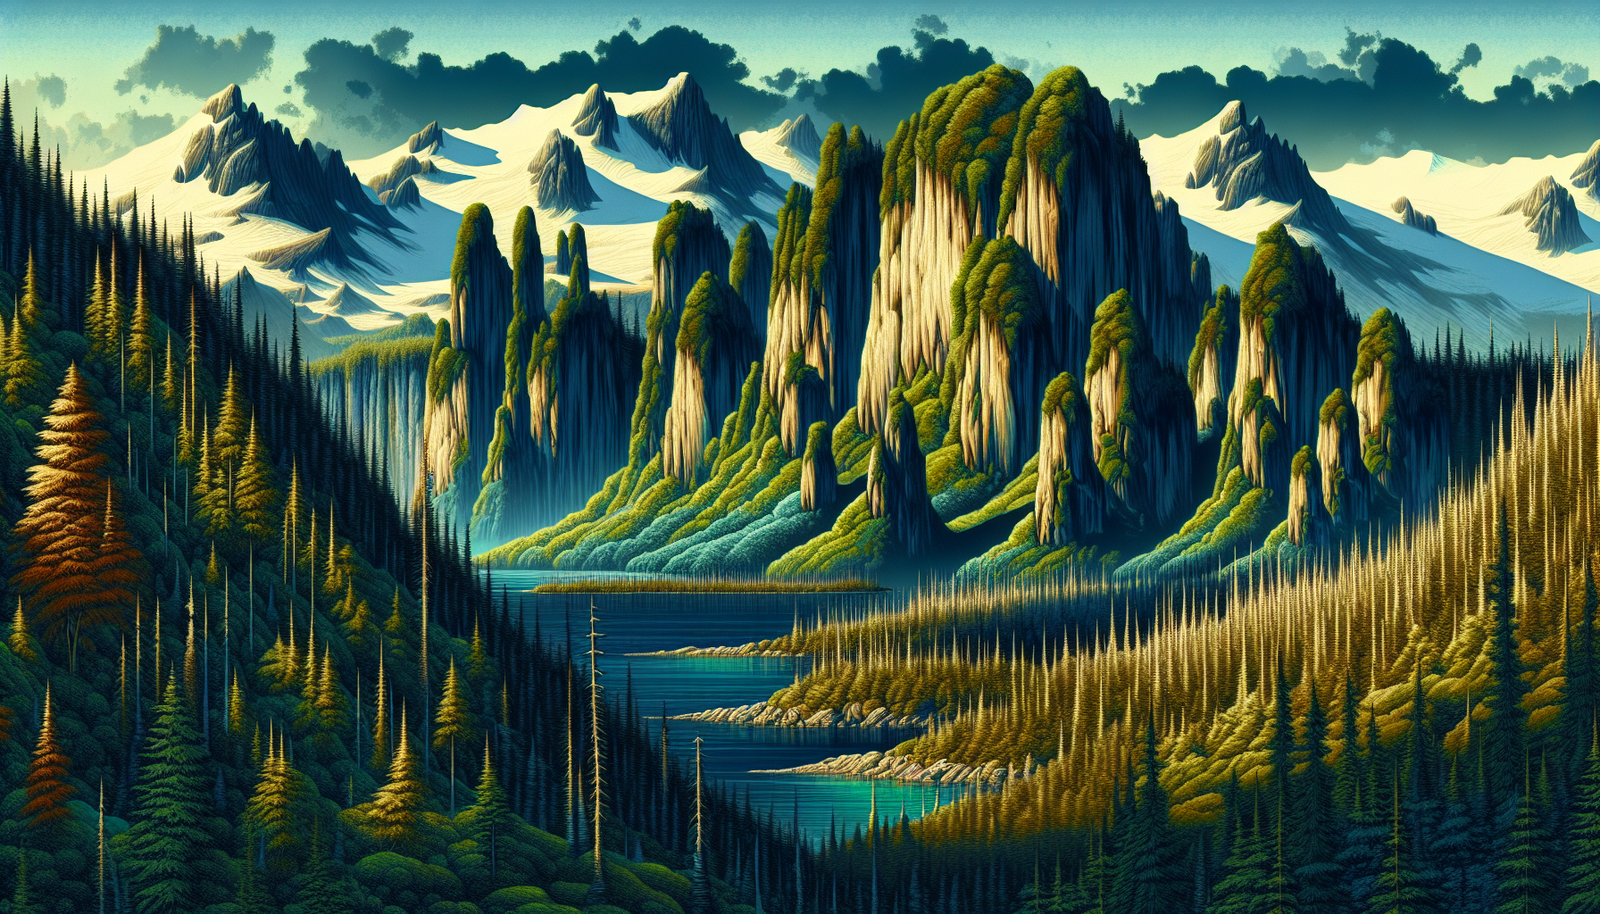 Illustration of Texada Island's unique geological formations and forested interior